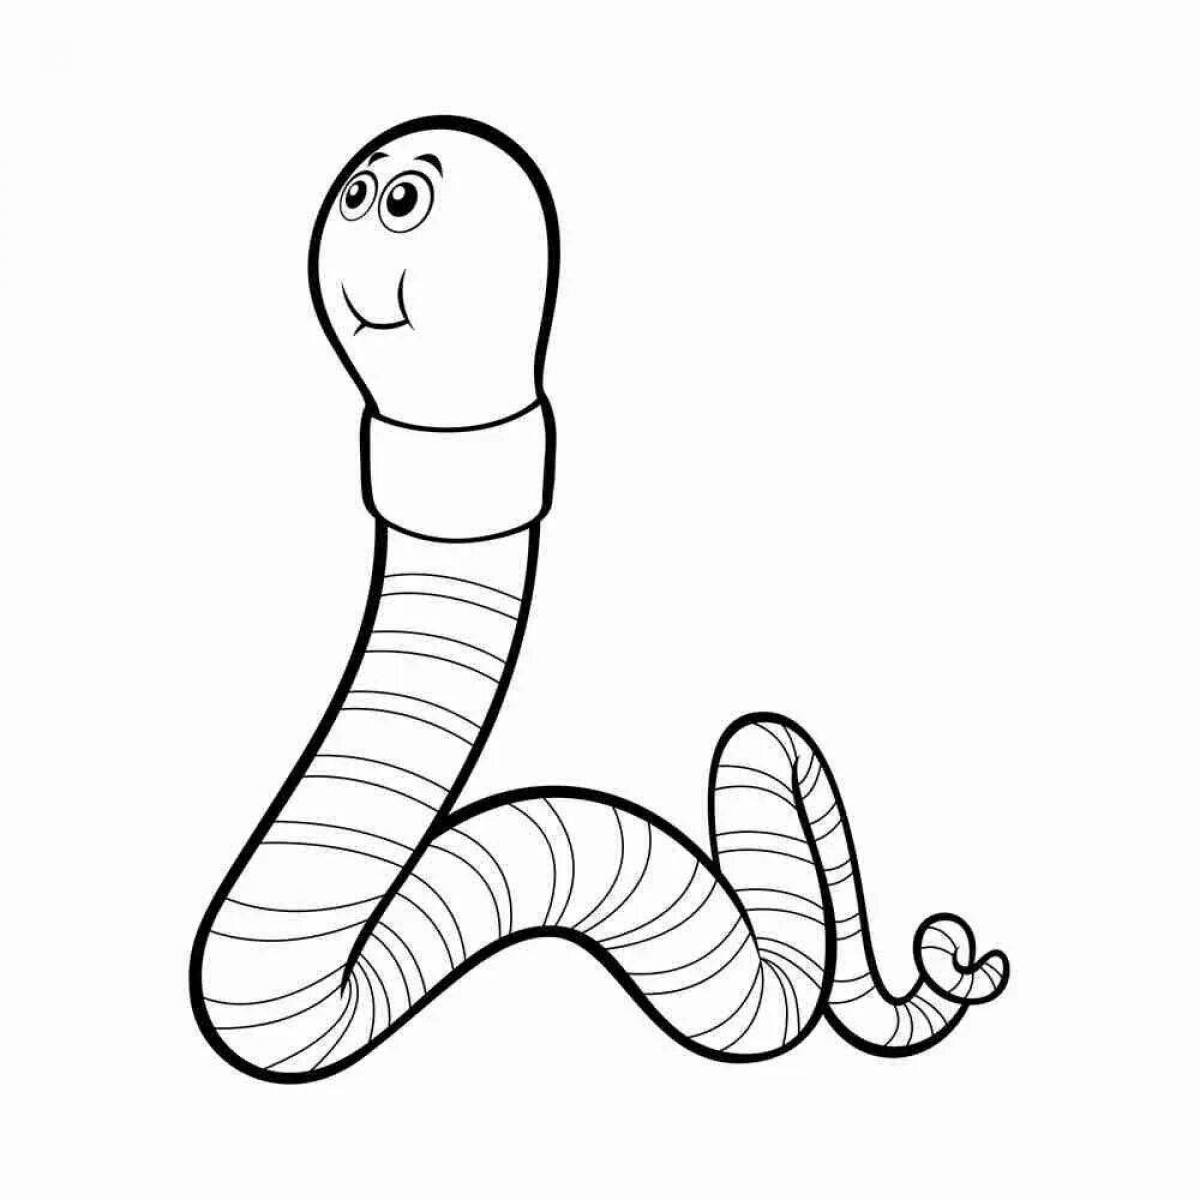 Worm for kids #14